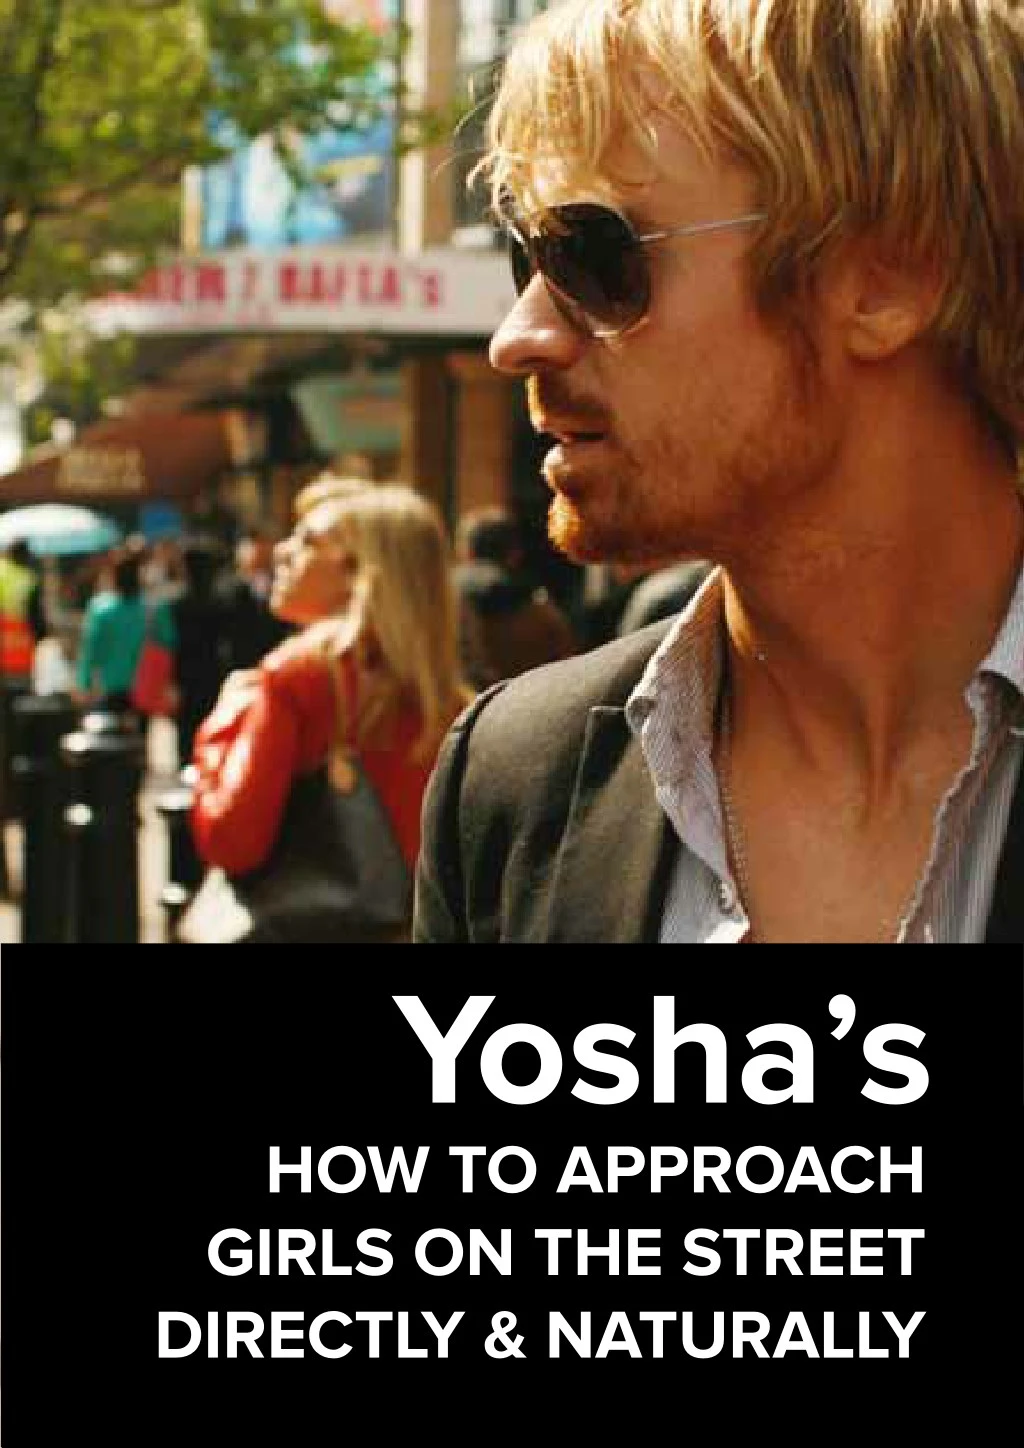 yosha how to approach girls on the street